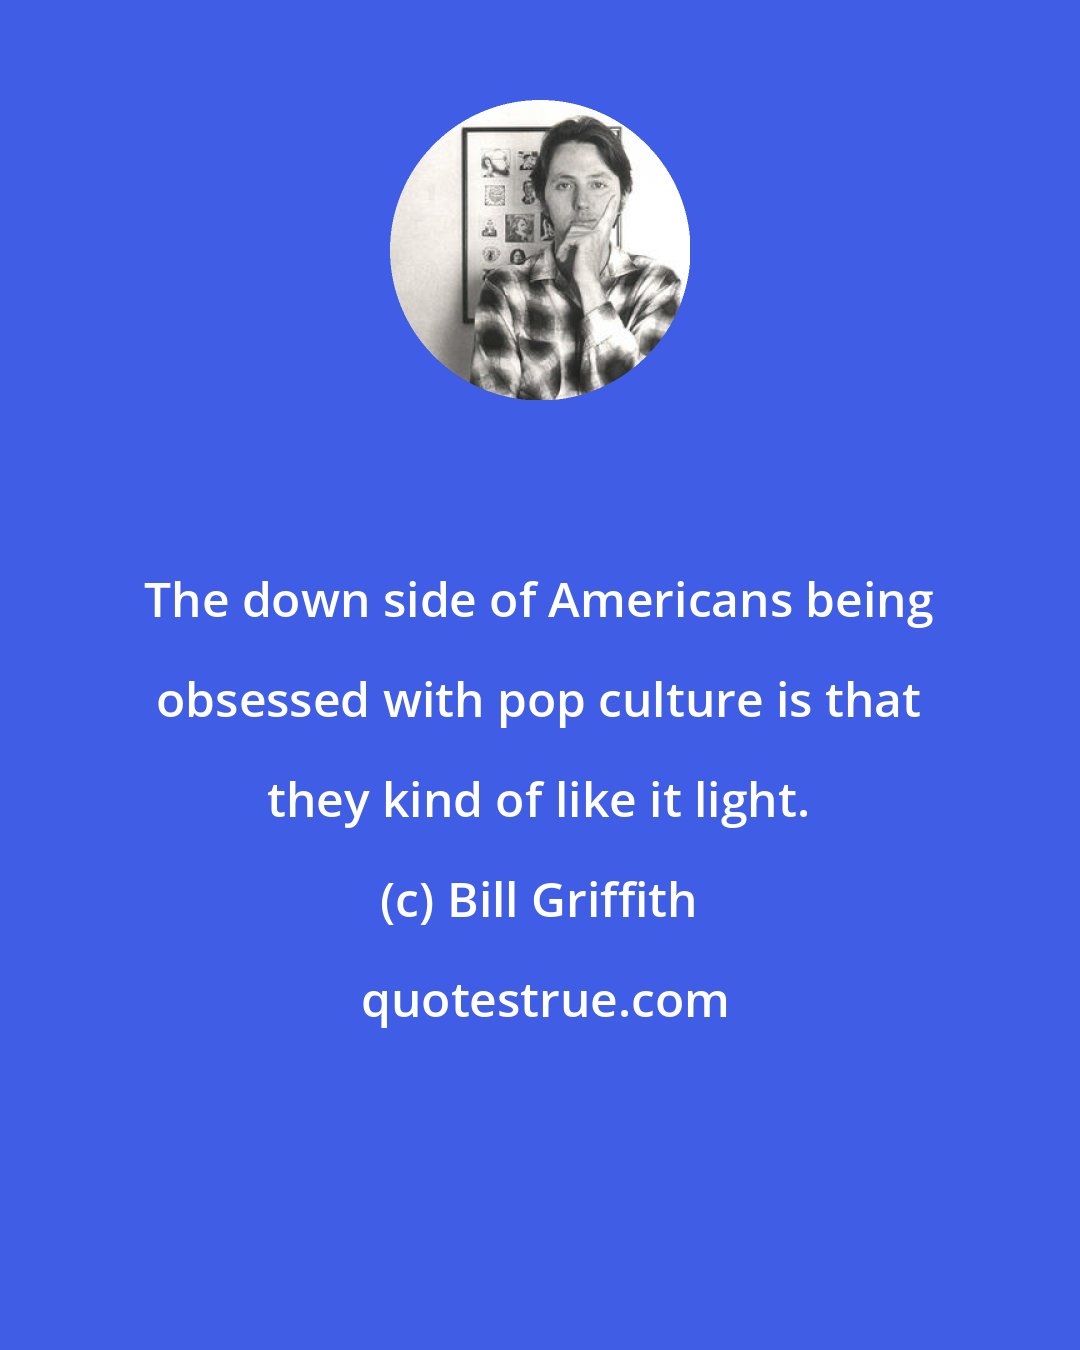 Bill Griffith: The down side of Americans being obsessed with pop culture is that they kind of like it light.